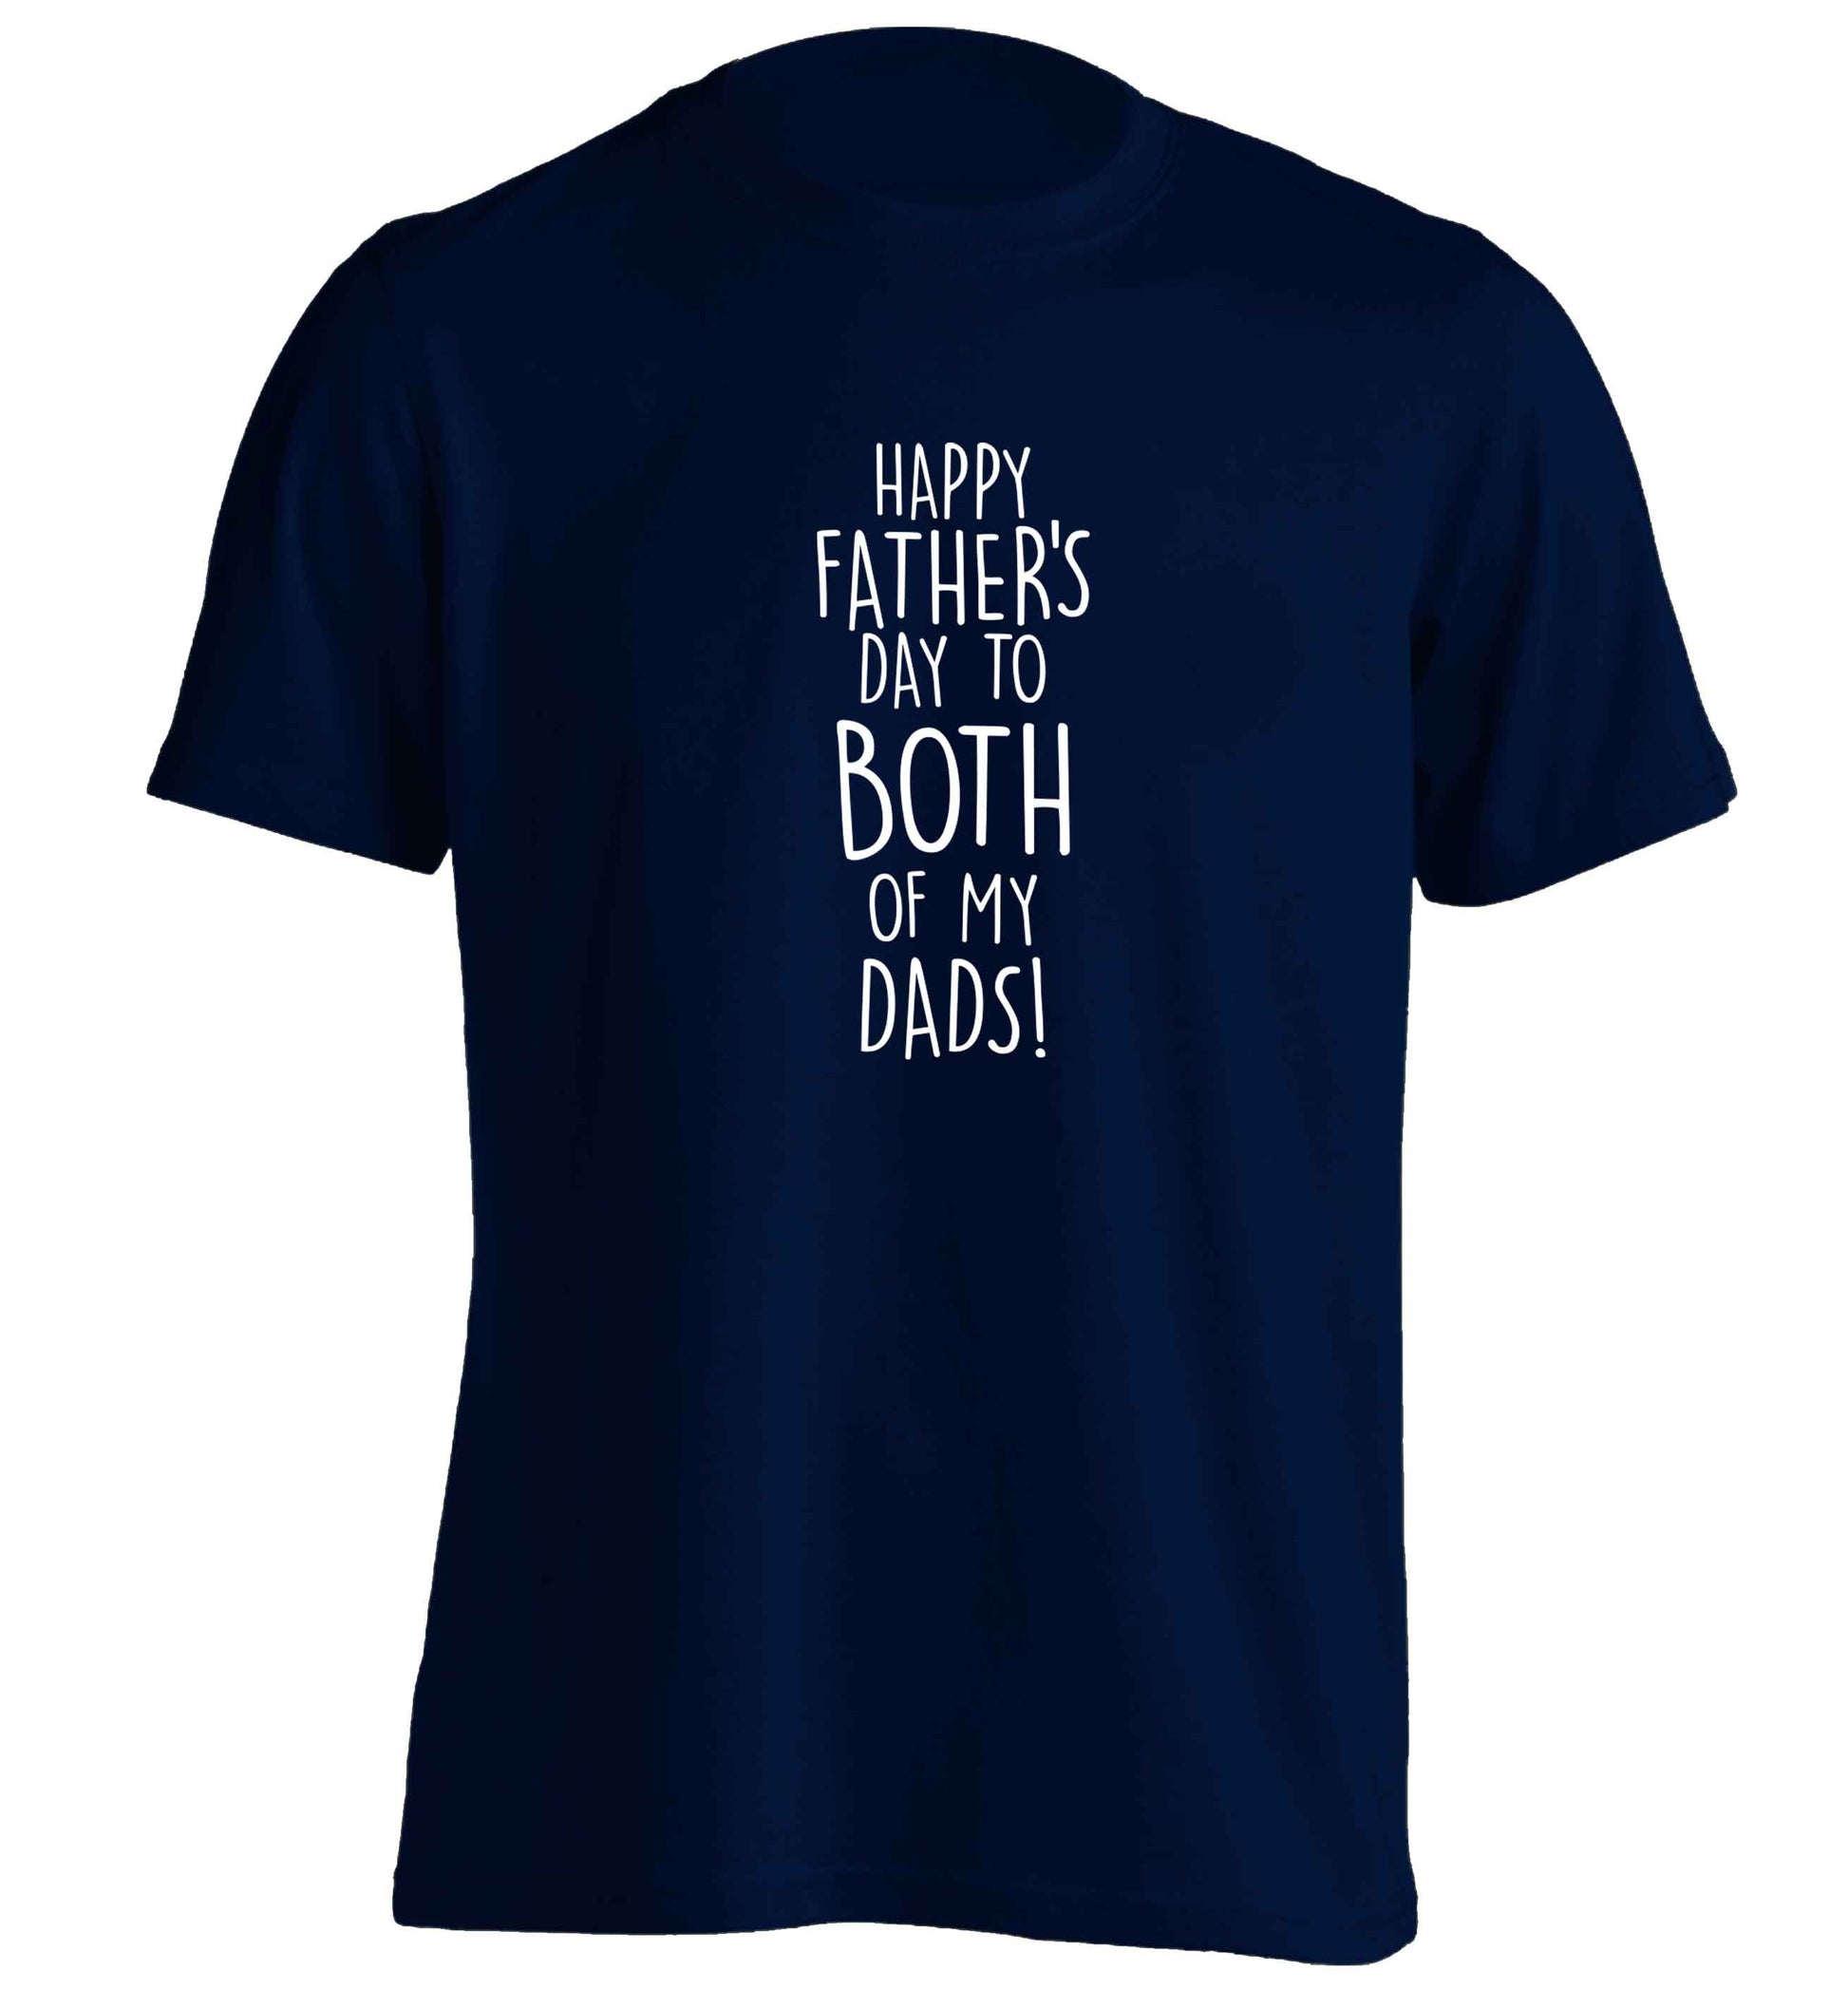 Happy Father's day to both of my dads adults unisex navy Tshirt 2XL